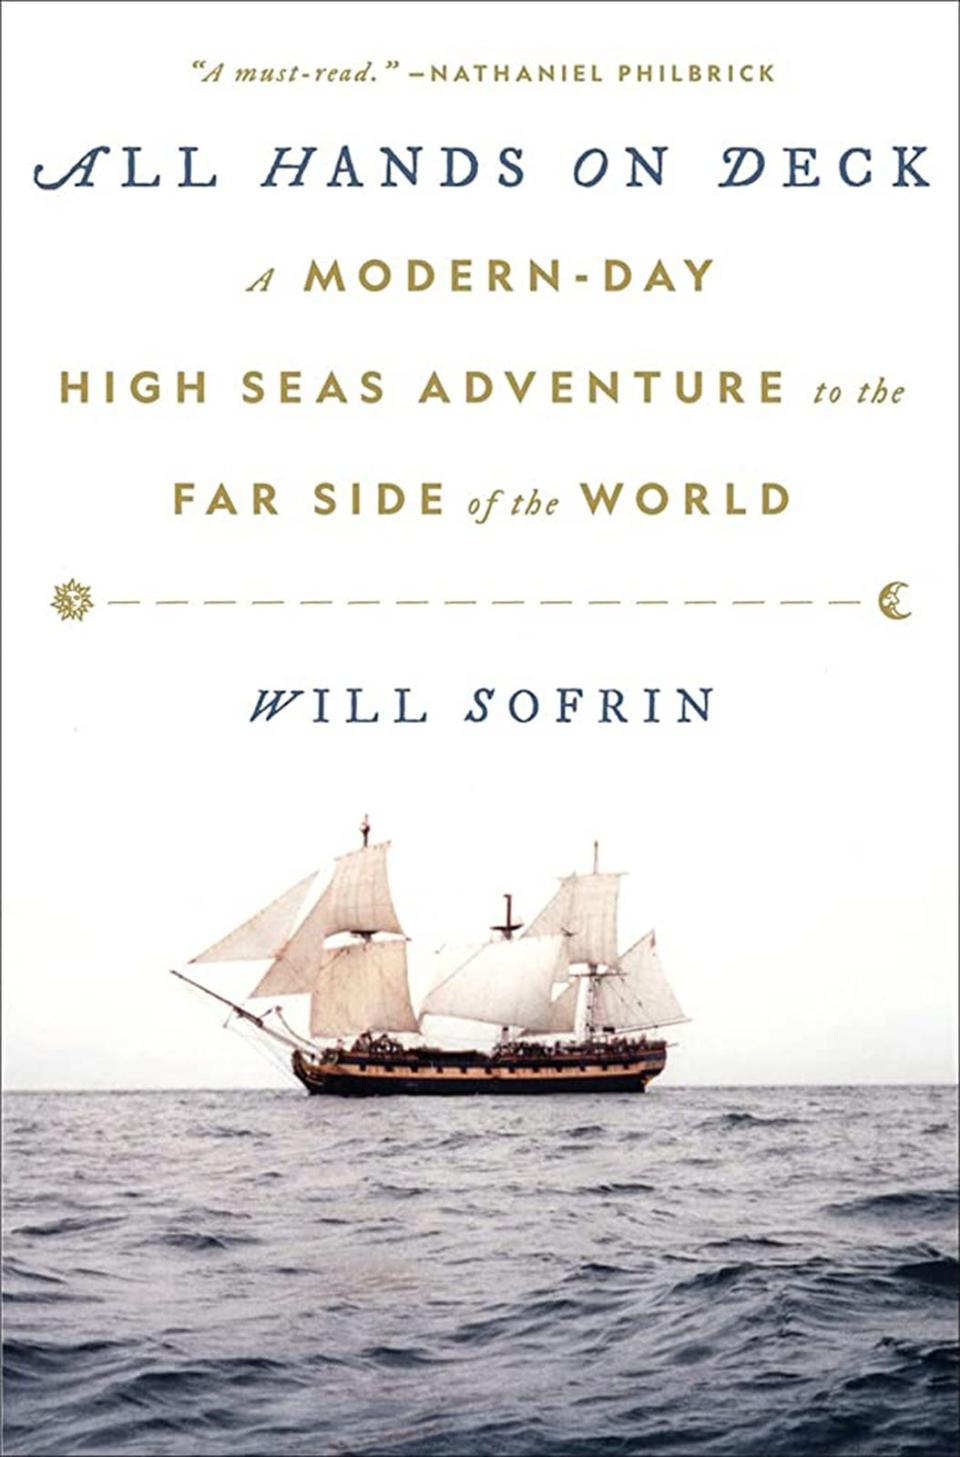 “All Hands on Deck: A Modern-Day High Seas Adventure to the Far Side of the World" by Will Sofrin.